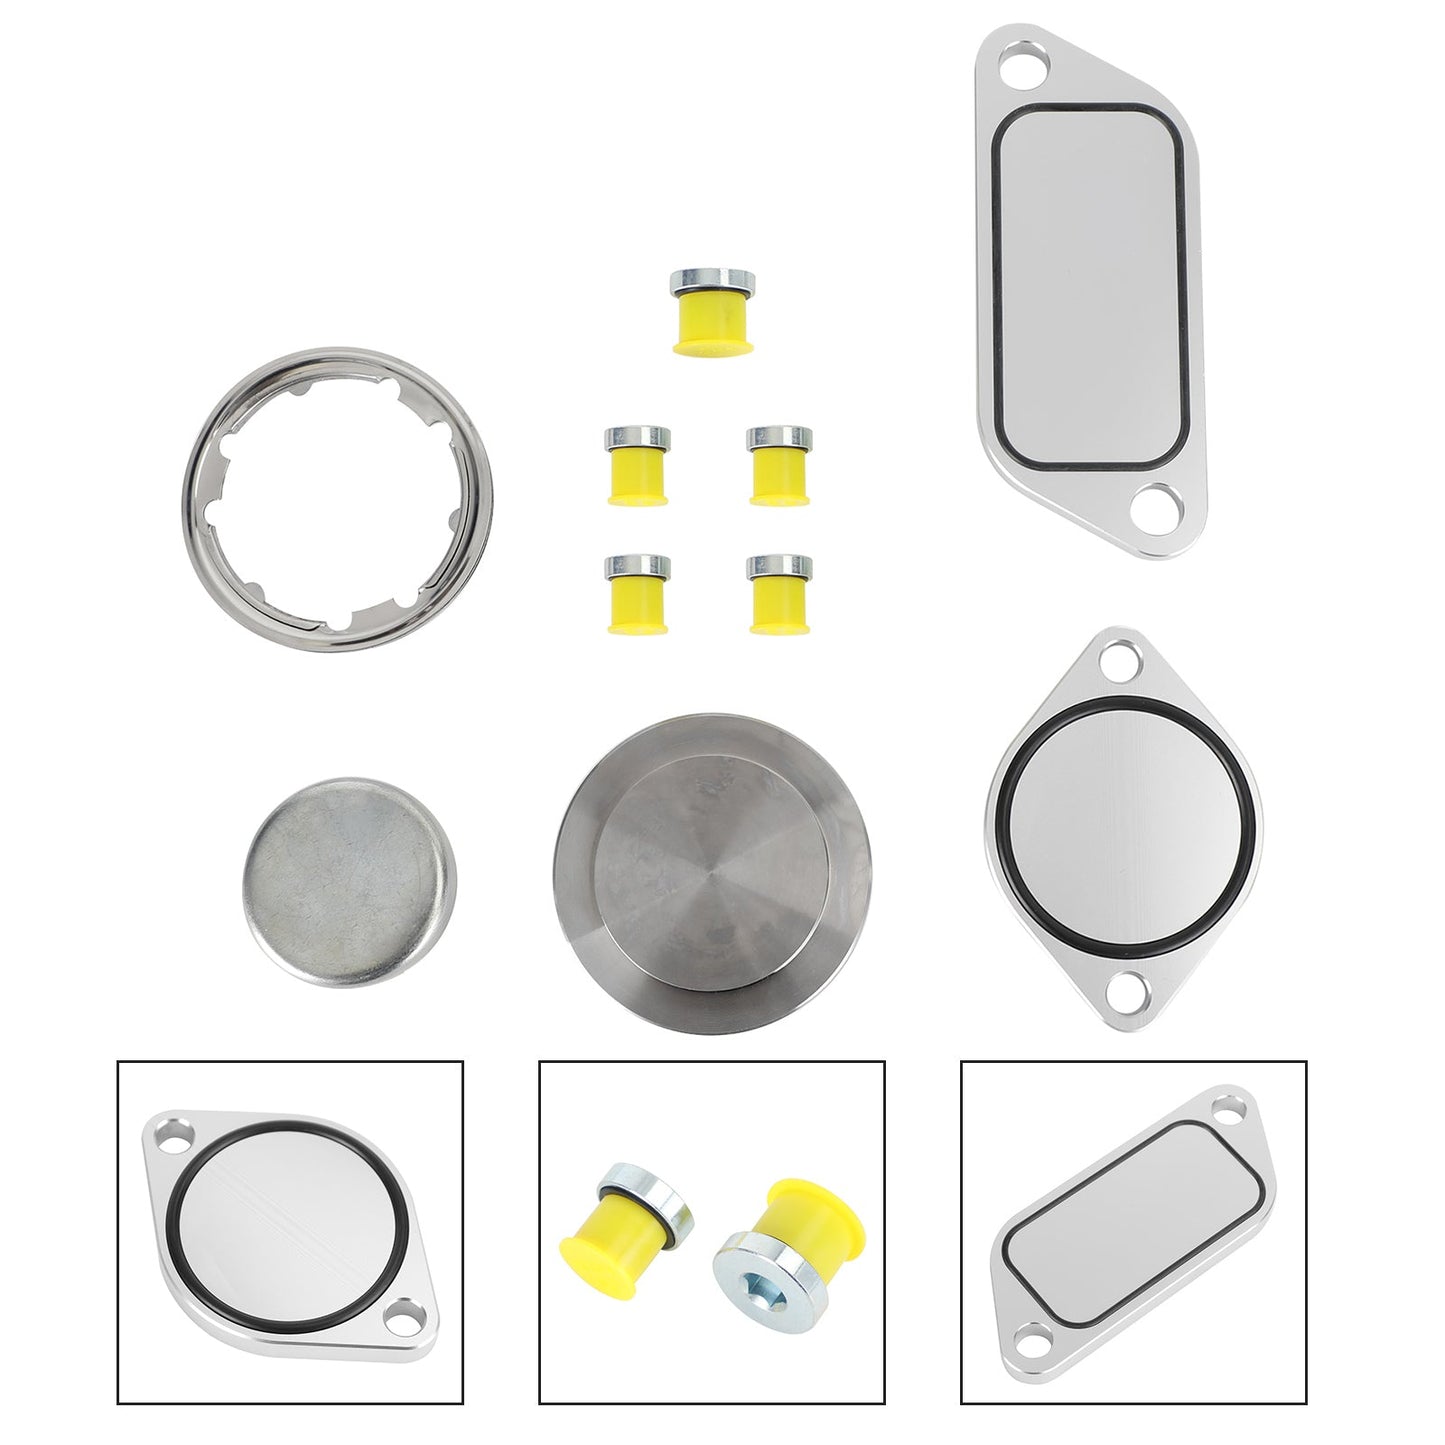 Plug Kit Stage 2 Plates and Plugs Fit For ISX 15 CM2250 CM2350 2010+